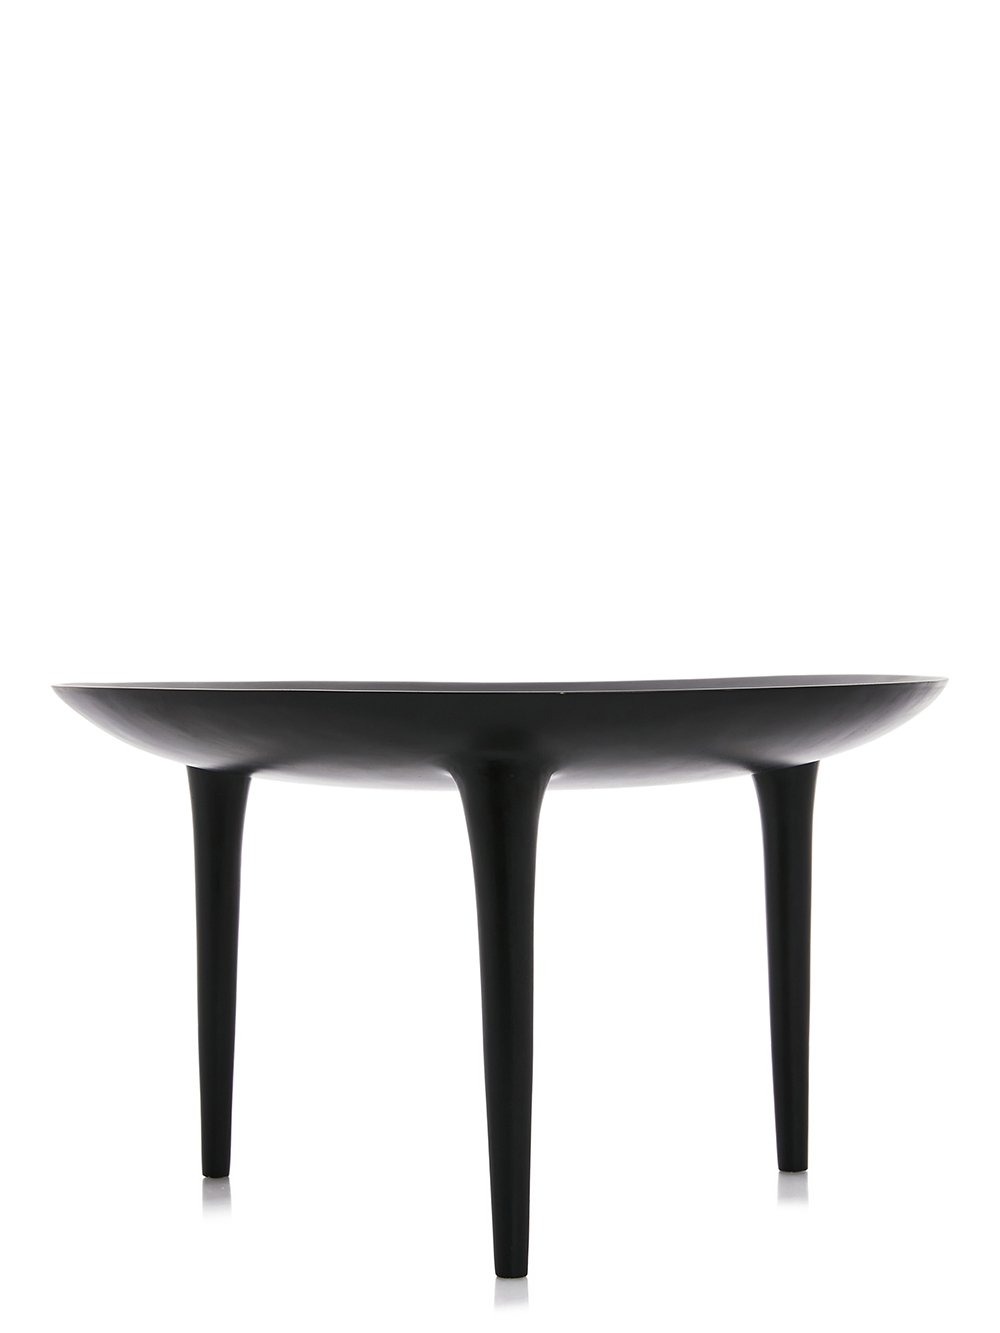 RICK OWENS BRAZIER IN BLACK BRONZE IS A ROUND SHAPED THREE LEGGED TABLE WITH POLISHED SURFACE.